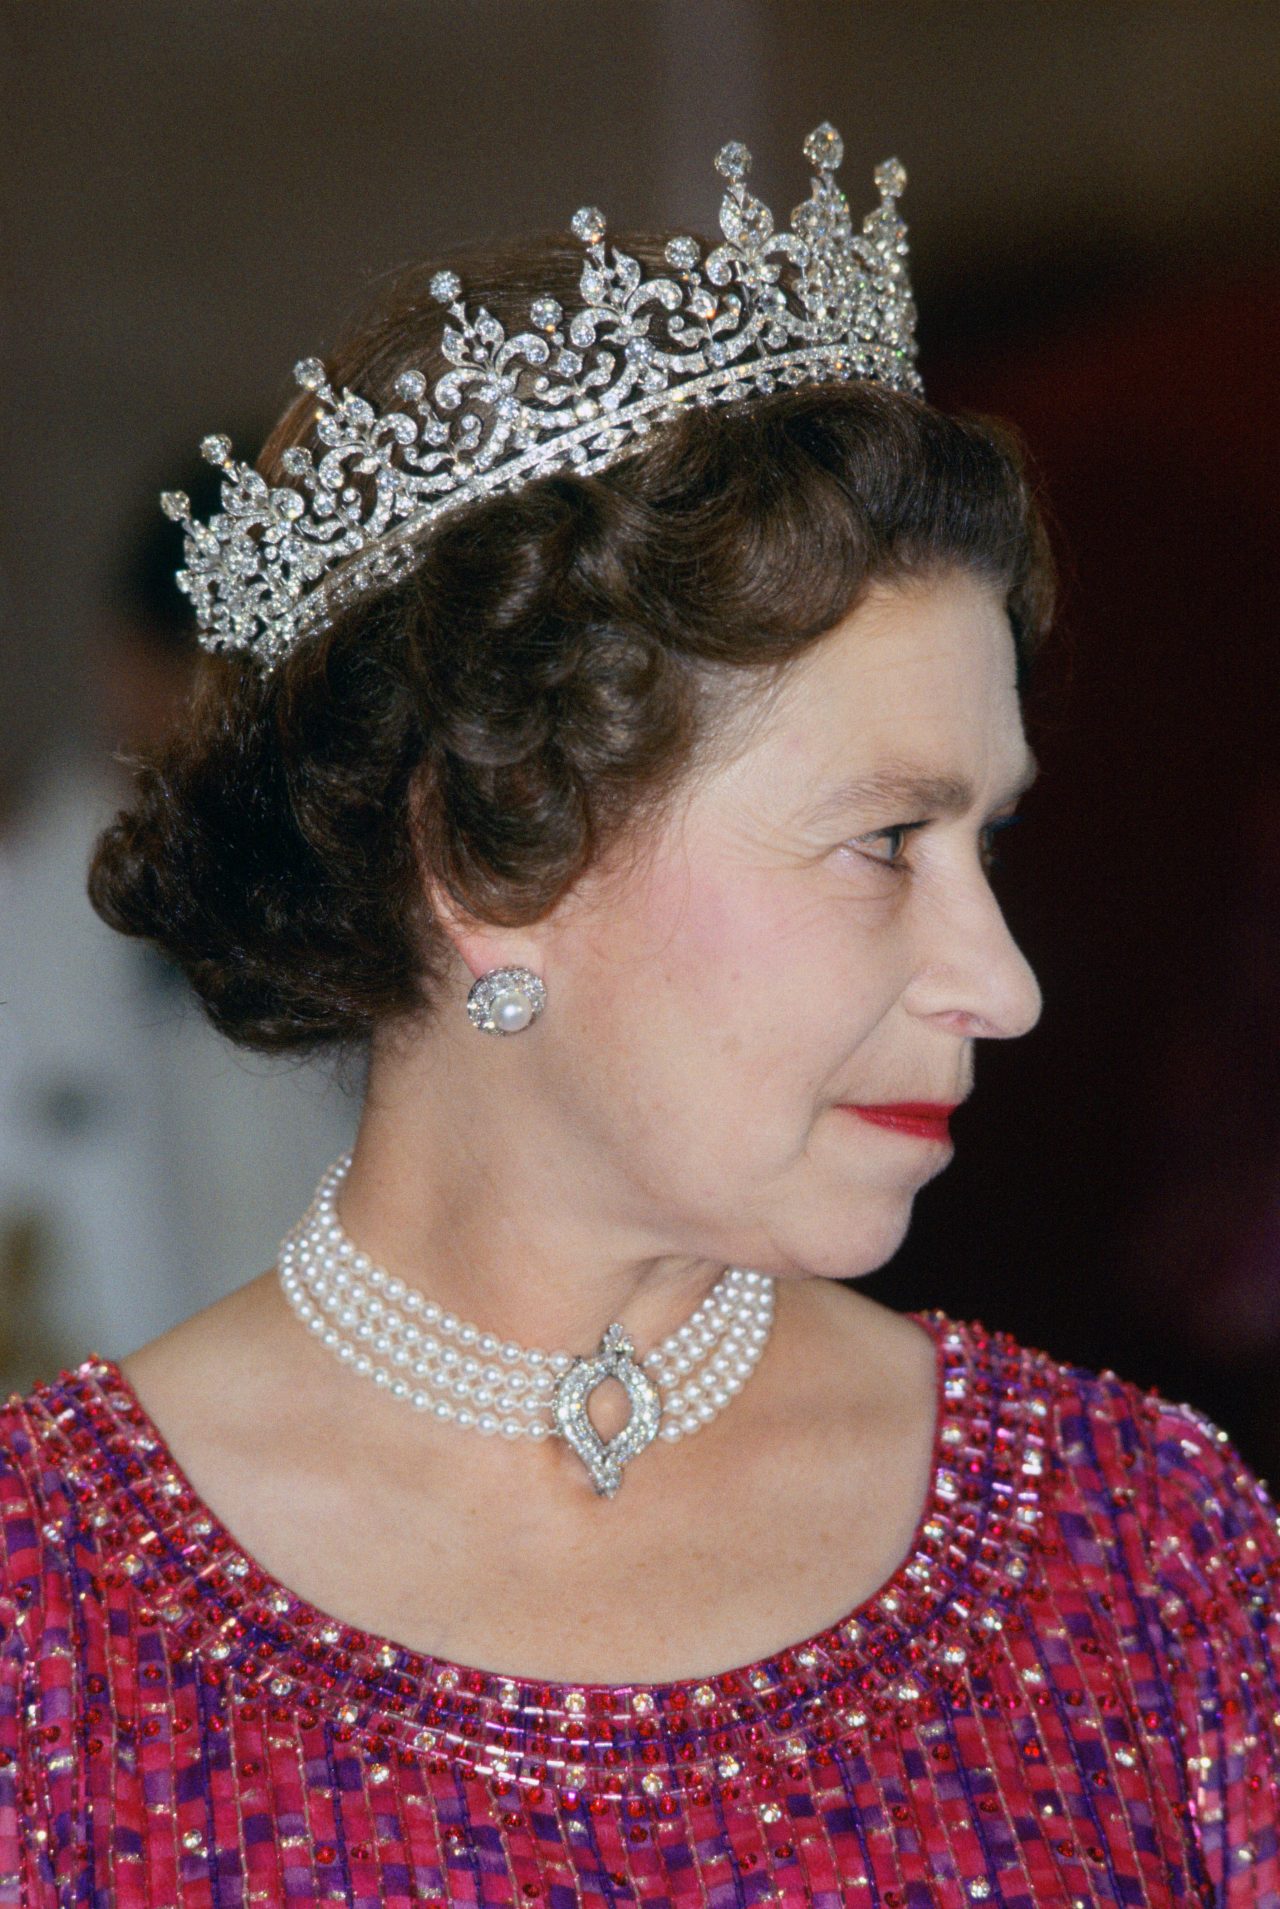 Princess of Wales wears Her Majesty's necklace and earrings at the Queen's funeral service